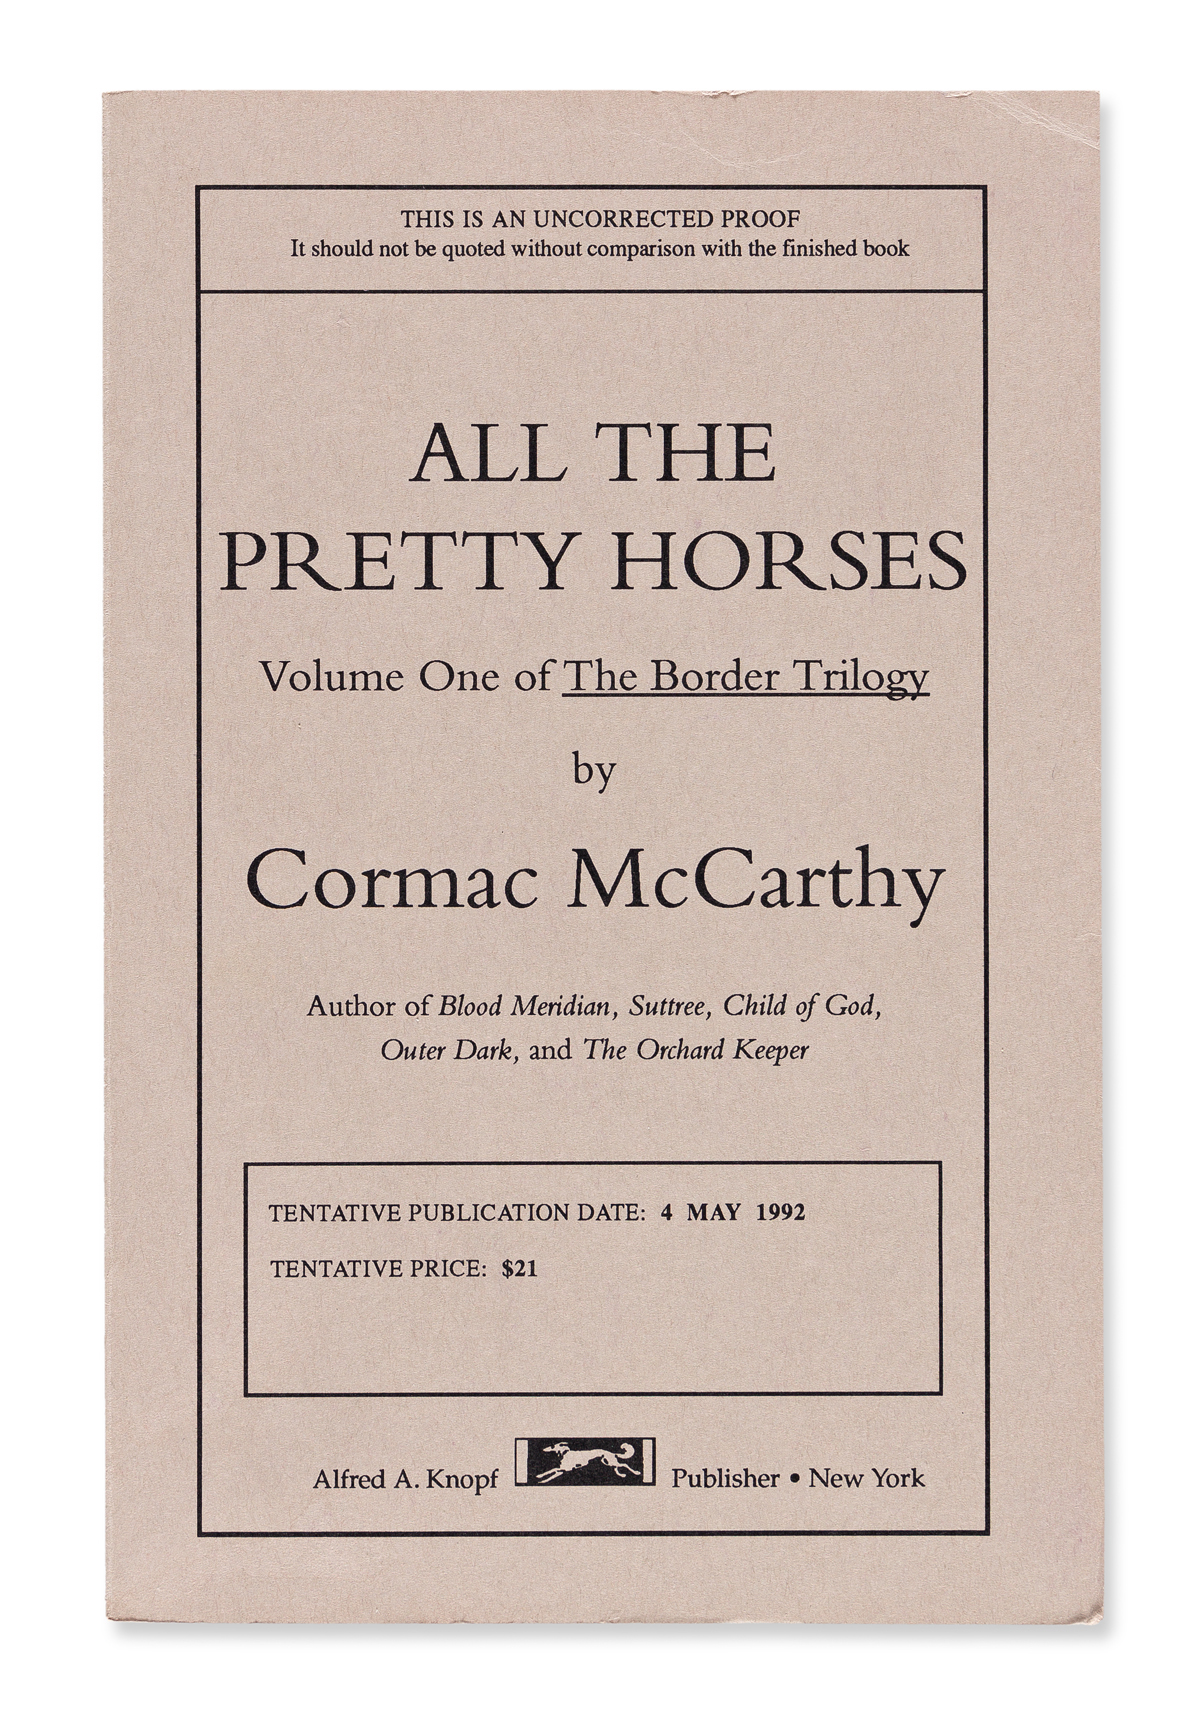 MCCARTHY, CORMAC. [The Border Trilogy.] All the Pretty Horses, The Crossing, Cities of the Plain.